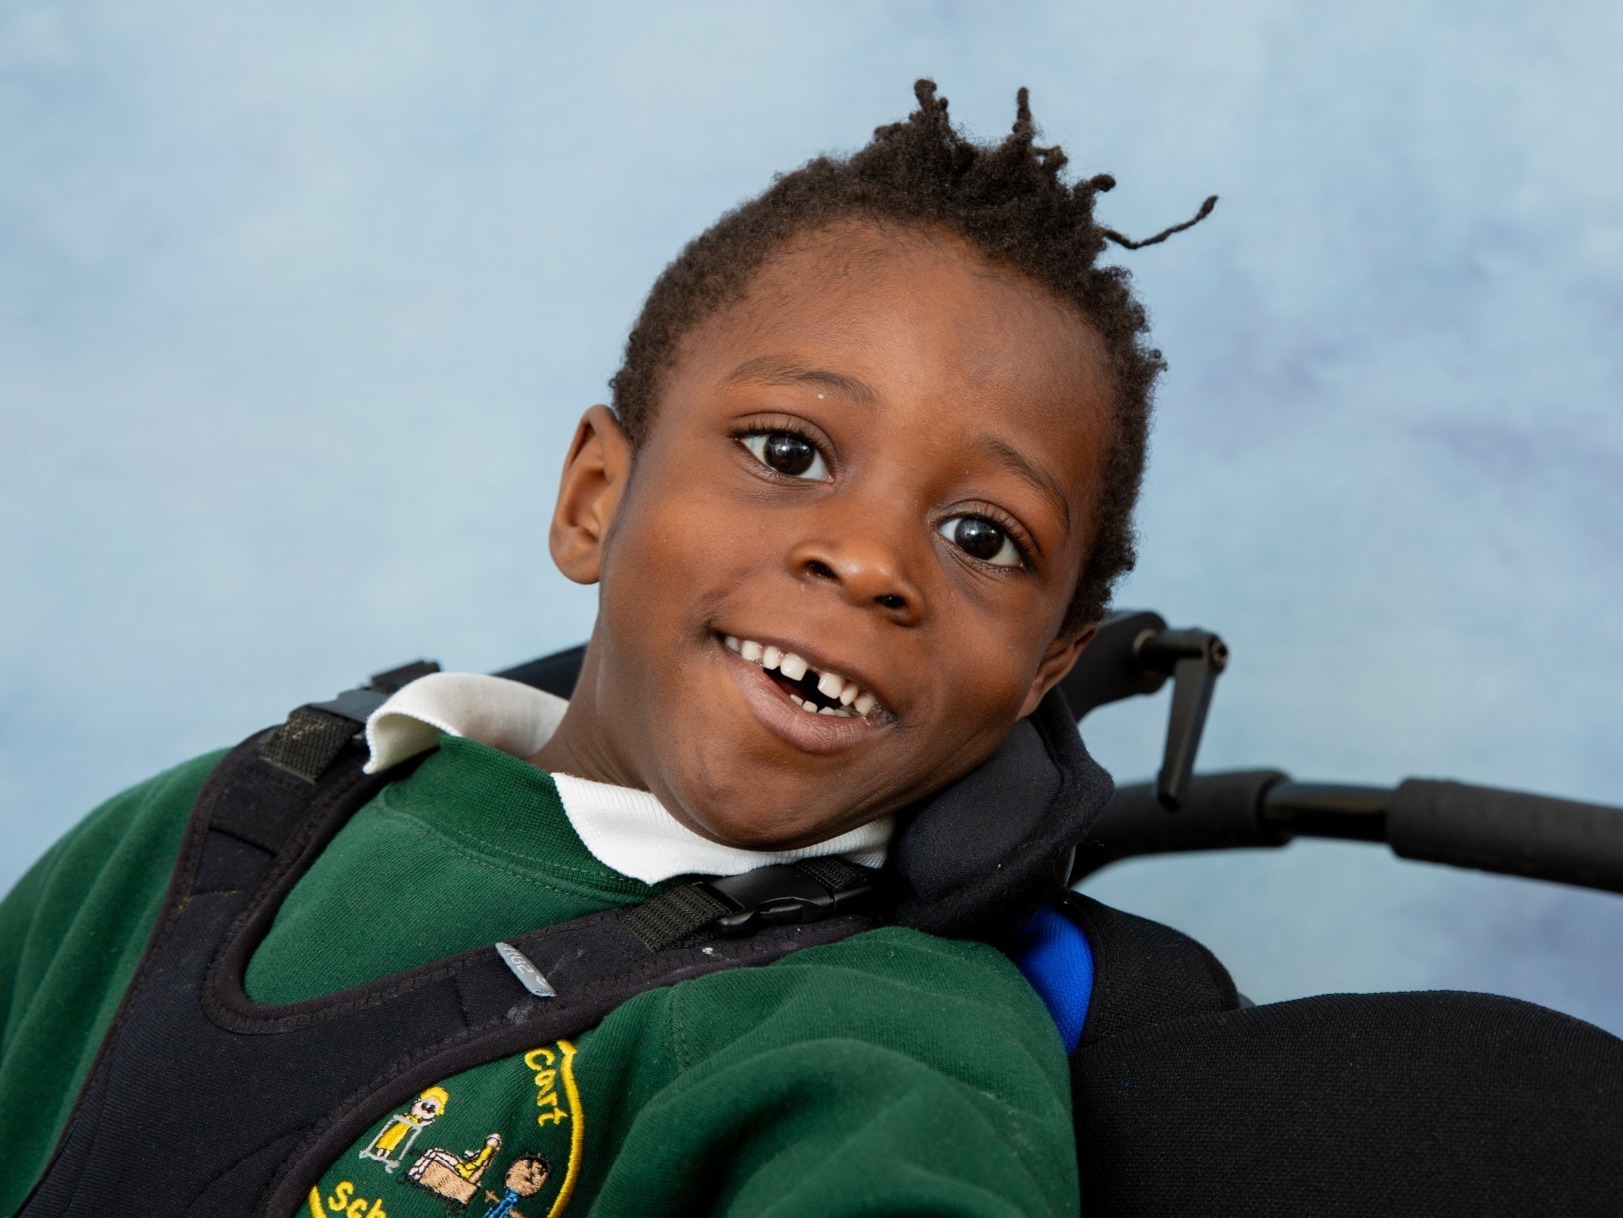 Big smile from this young disabled boy having his accessible school portrait taken in Kent